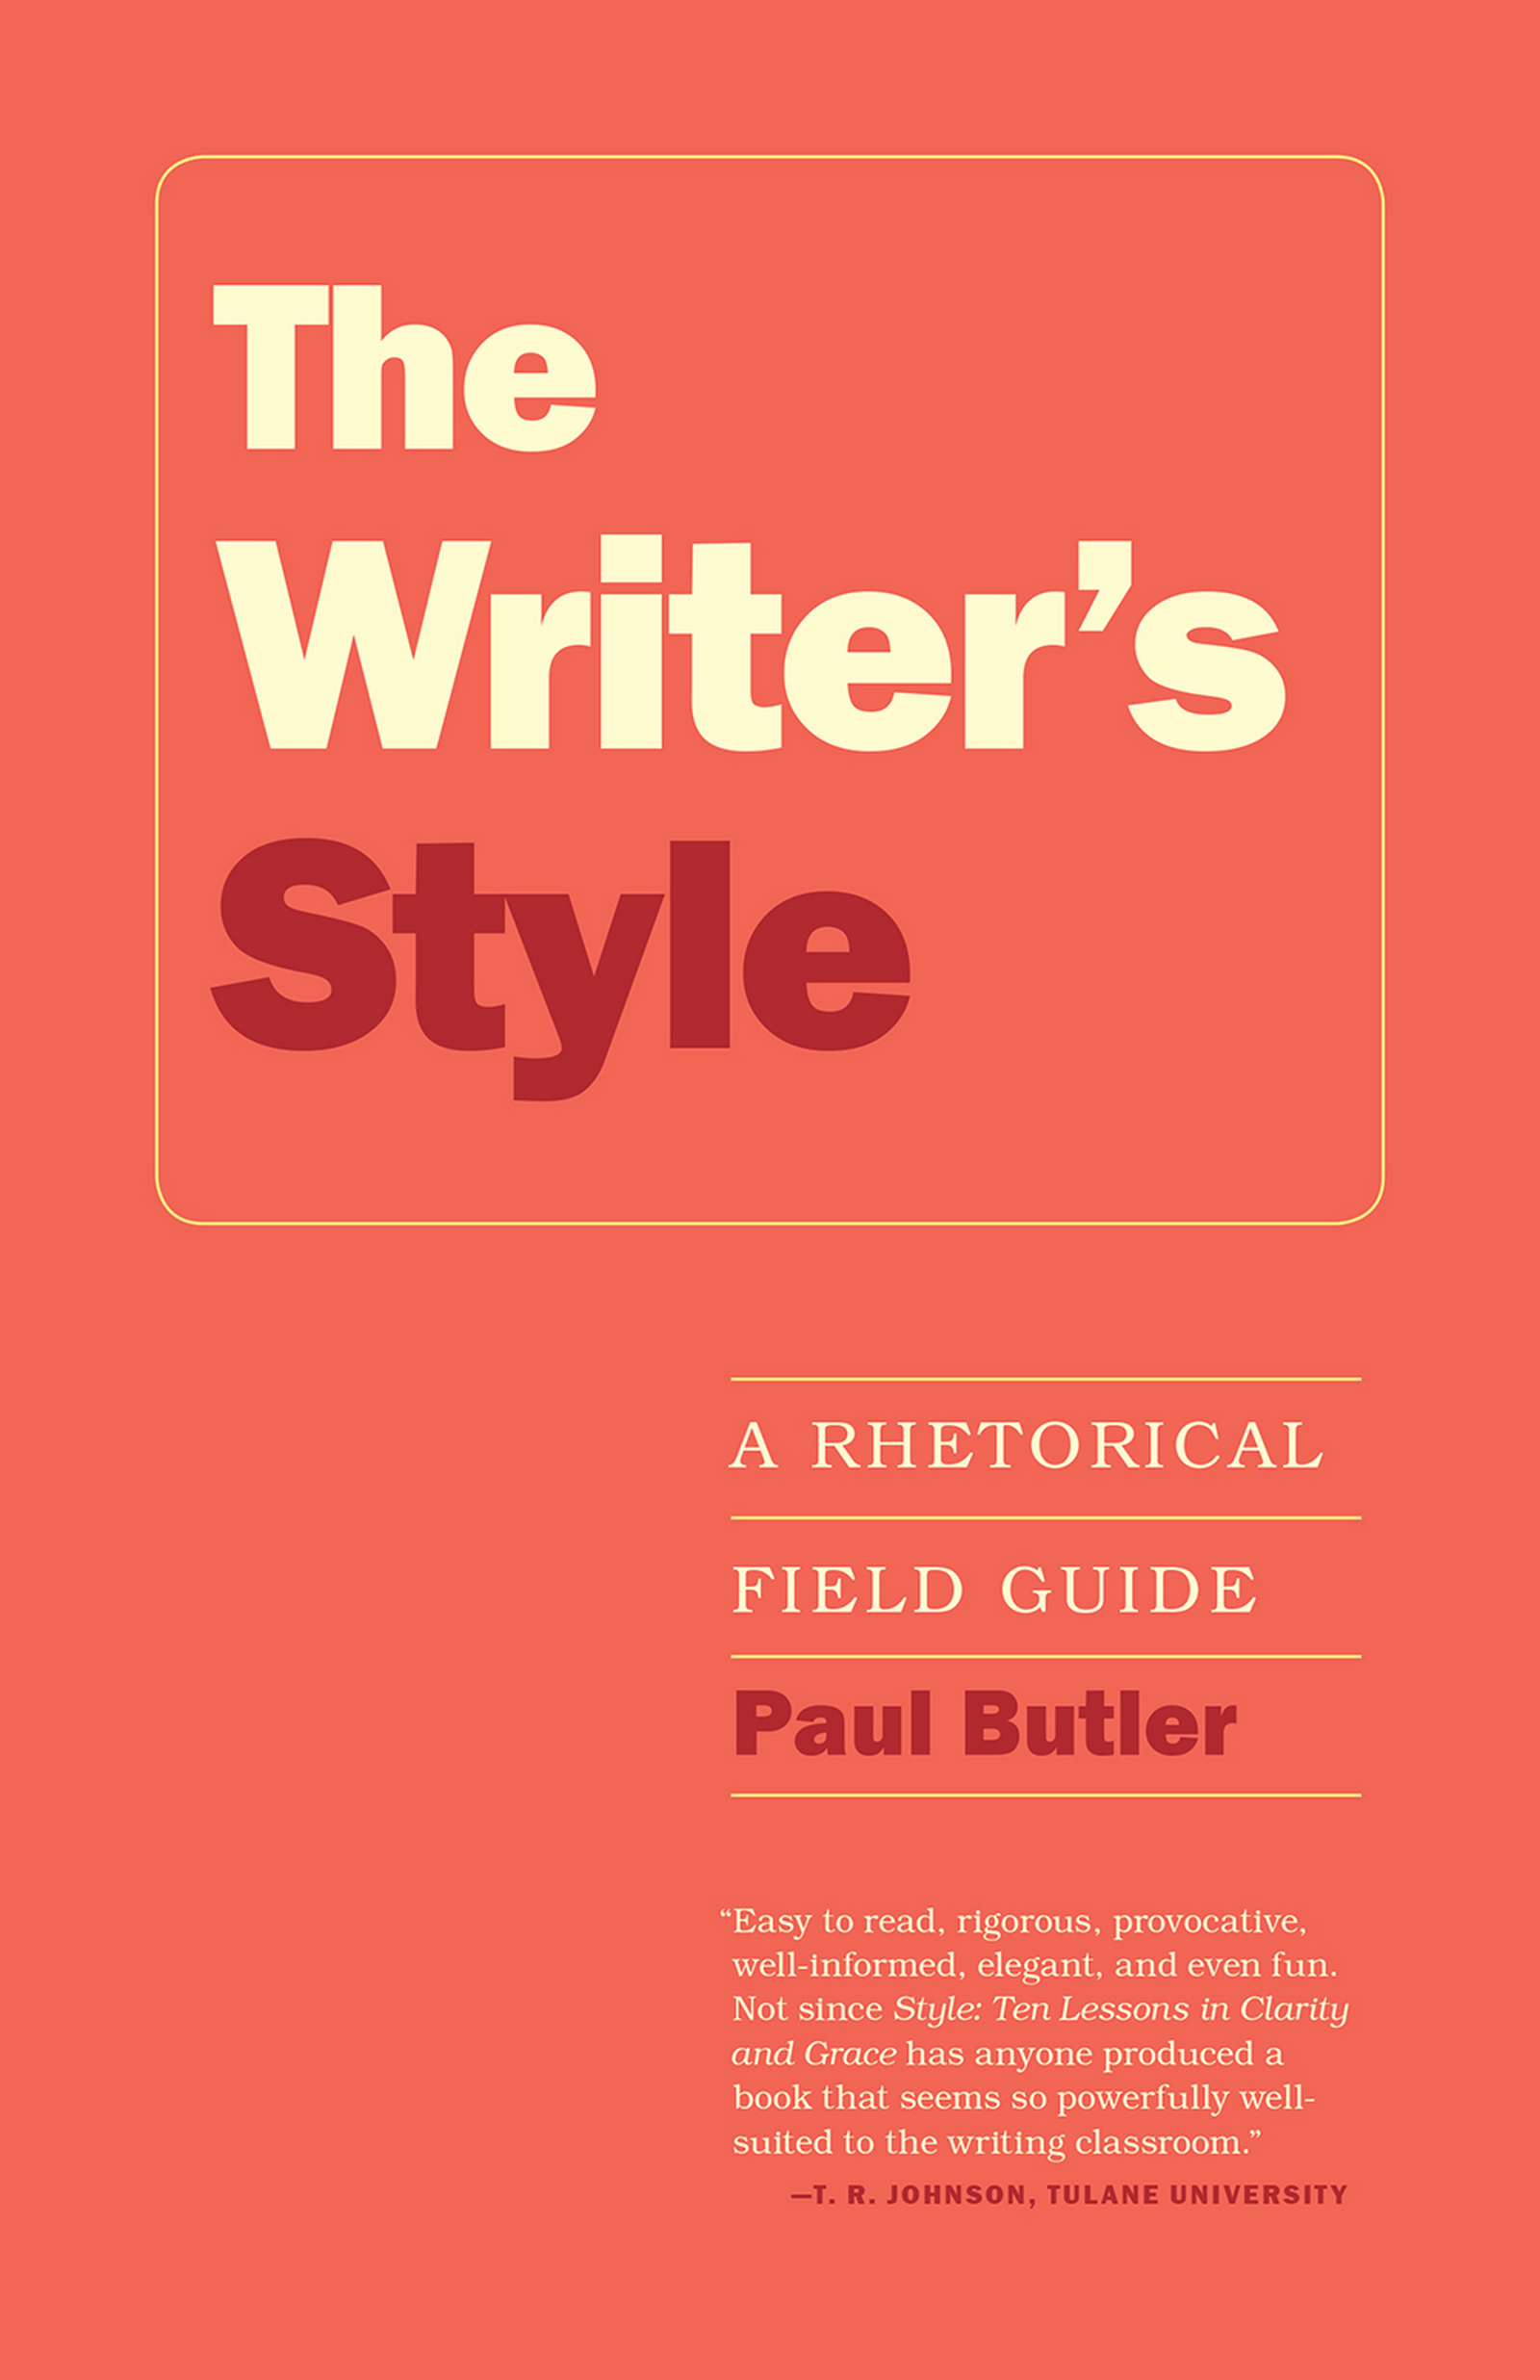 The Writer's Style